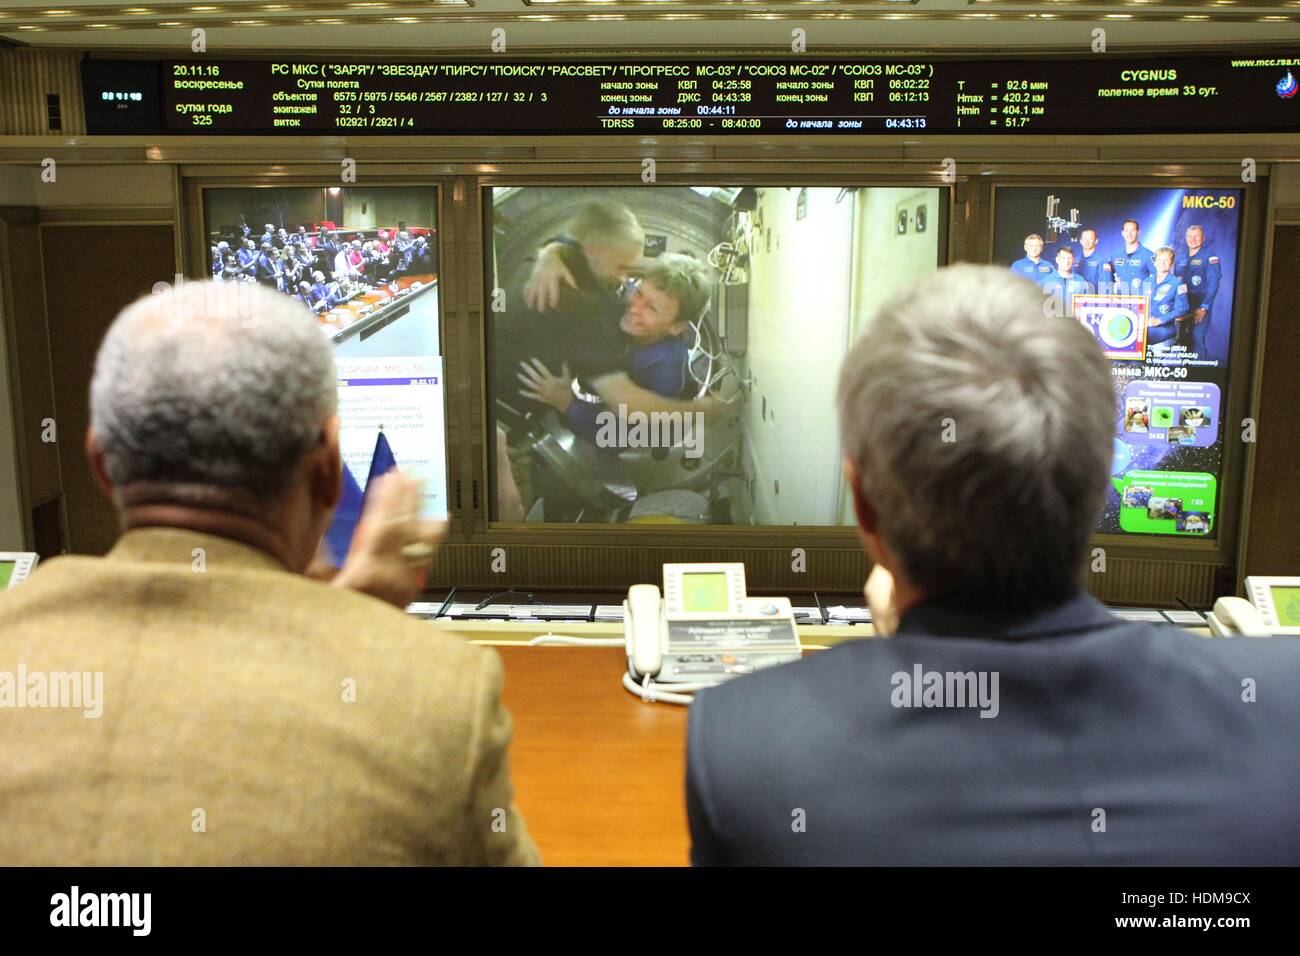 NASA Administrator Charles Bolden (left) and Roscosmos Manager Sergei Krikalev watch Expedition 50-51 prime crew astronaut Peggy Whitson enter the International Space Station following the docking of the Soyuz MS-03 spacecraft at the Russian Mission Control Center November 20, 2016 in Korolev, Russia. Stock Photo